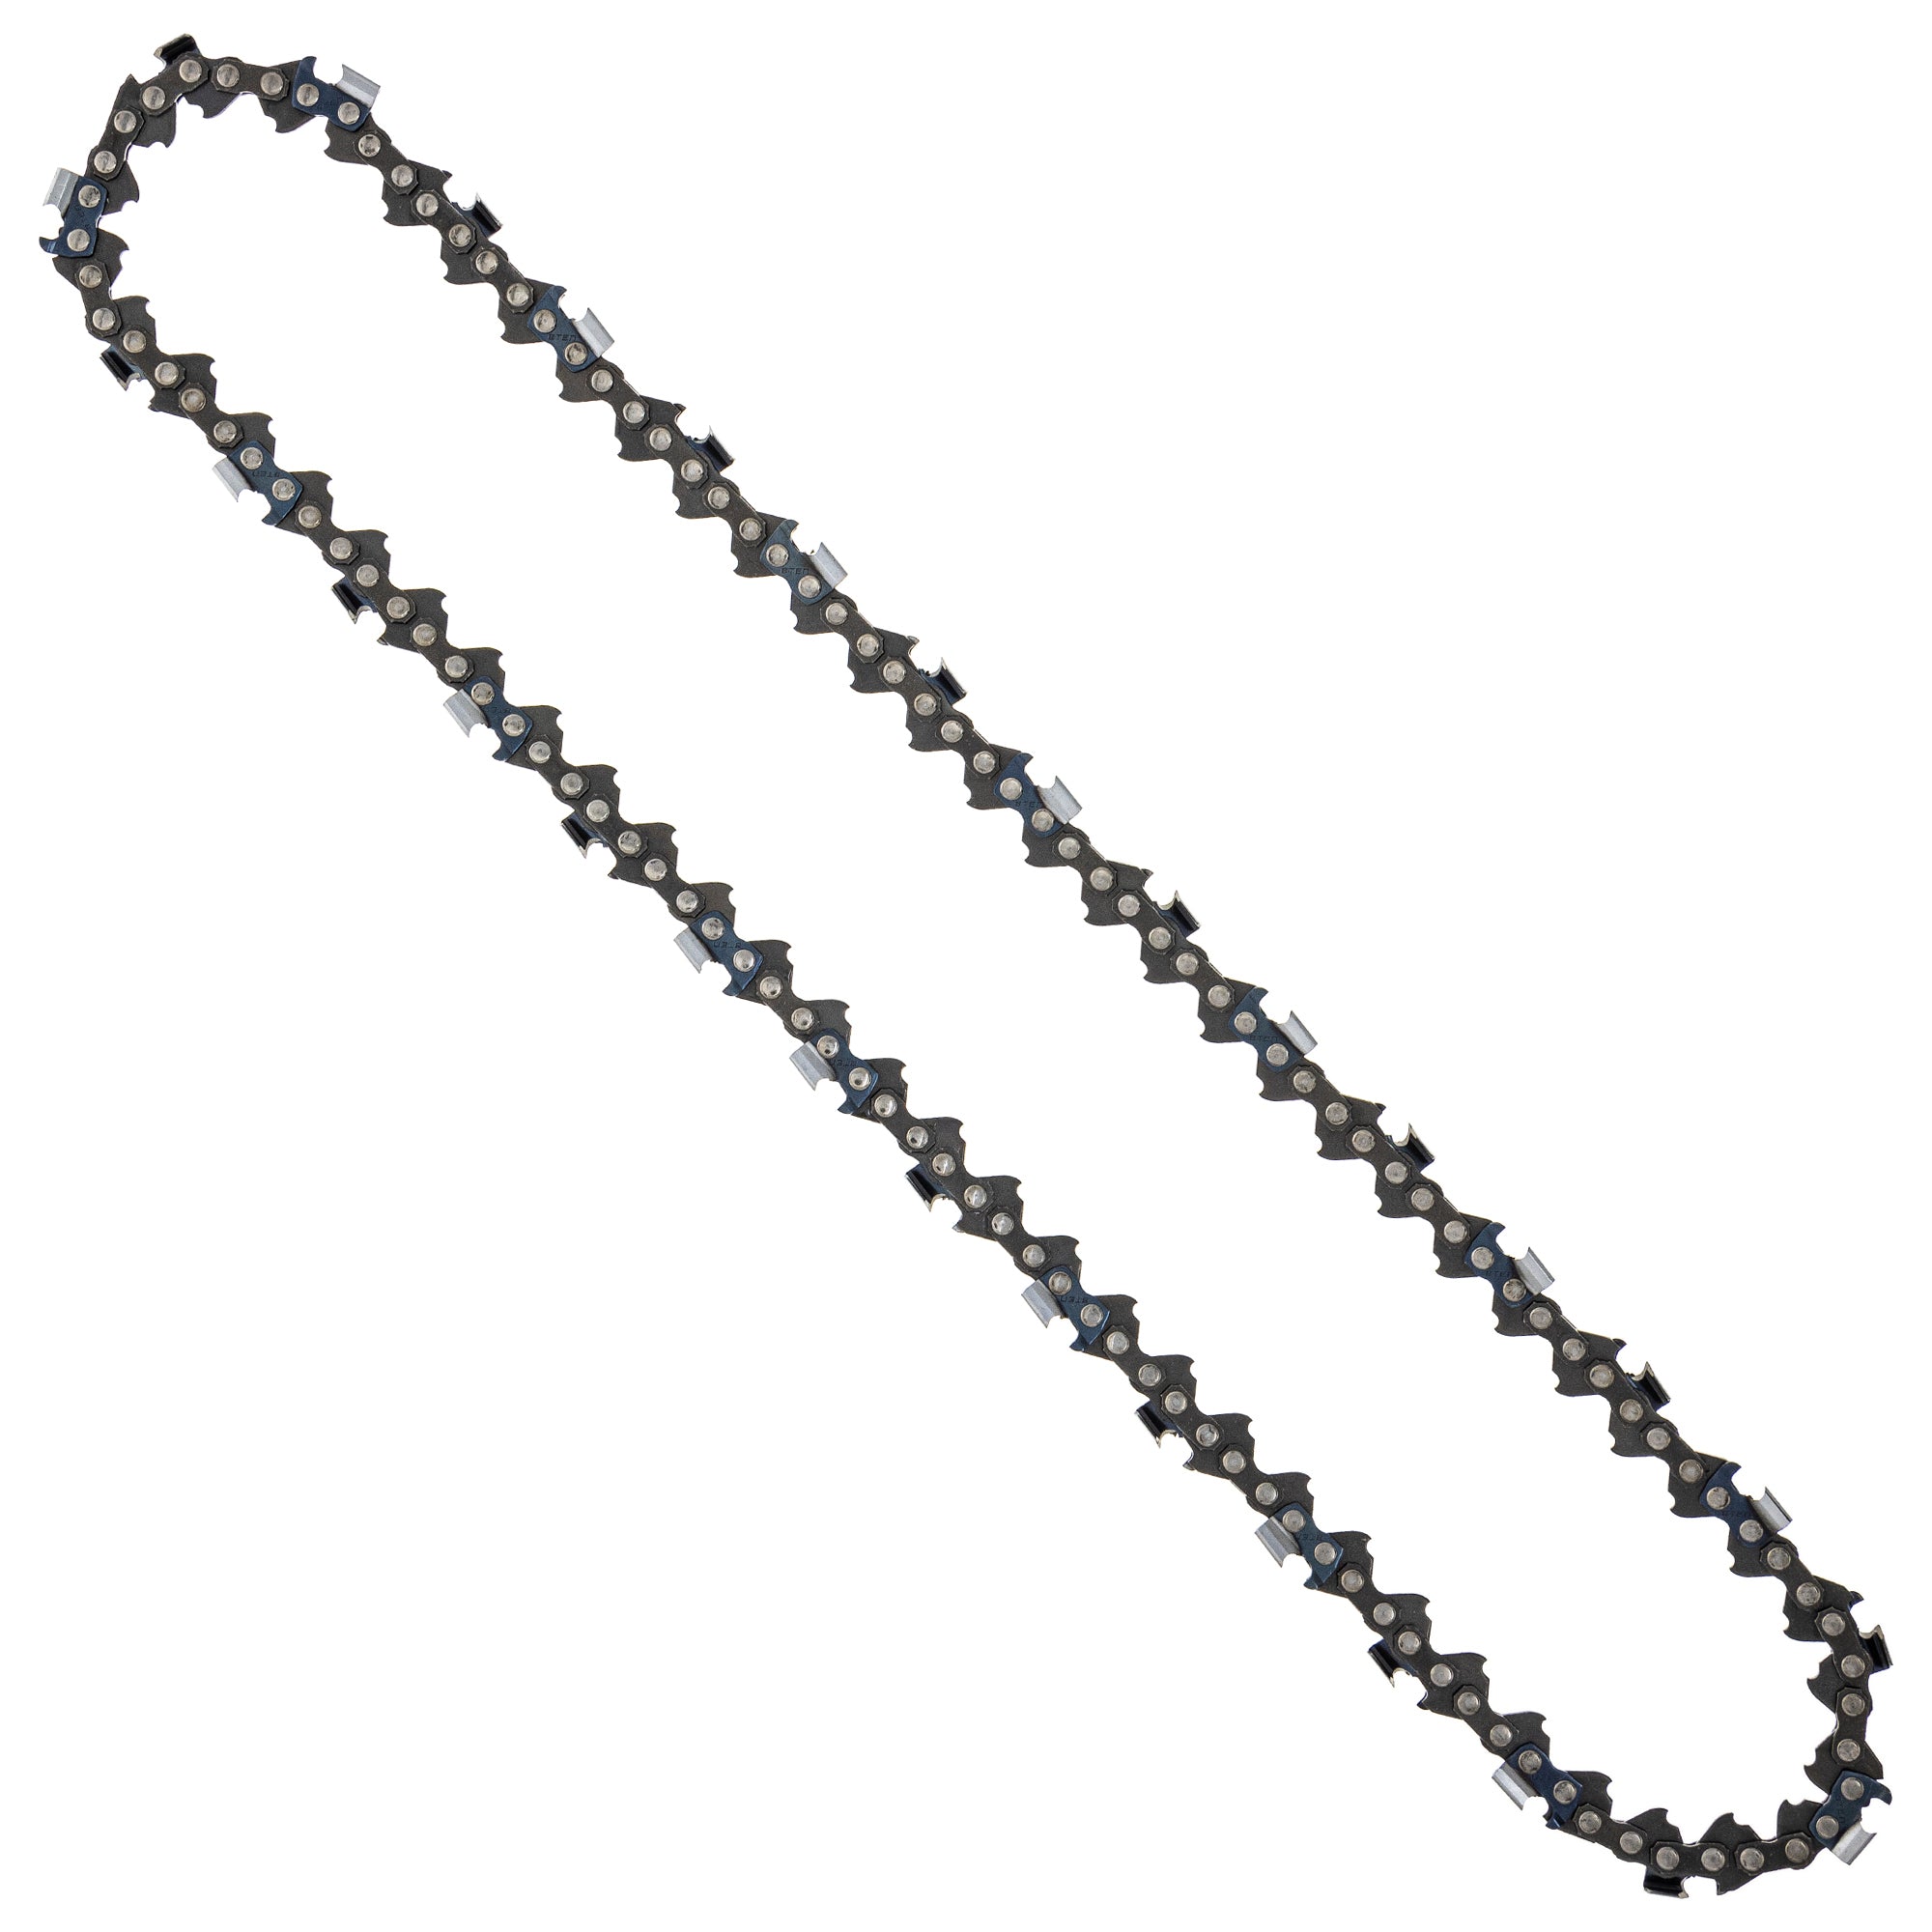 8TEN 810-CCC2399H Chain 10-Pack for zOTHER Oregon MS 25 070 025